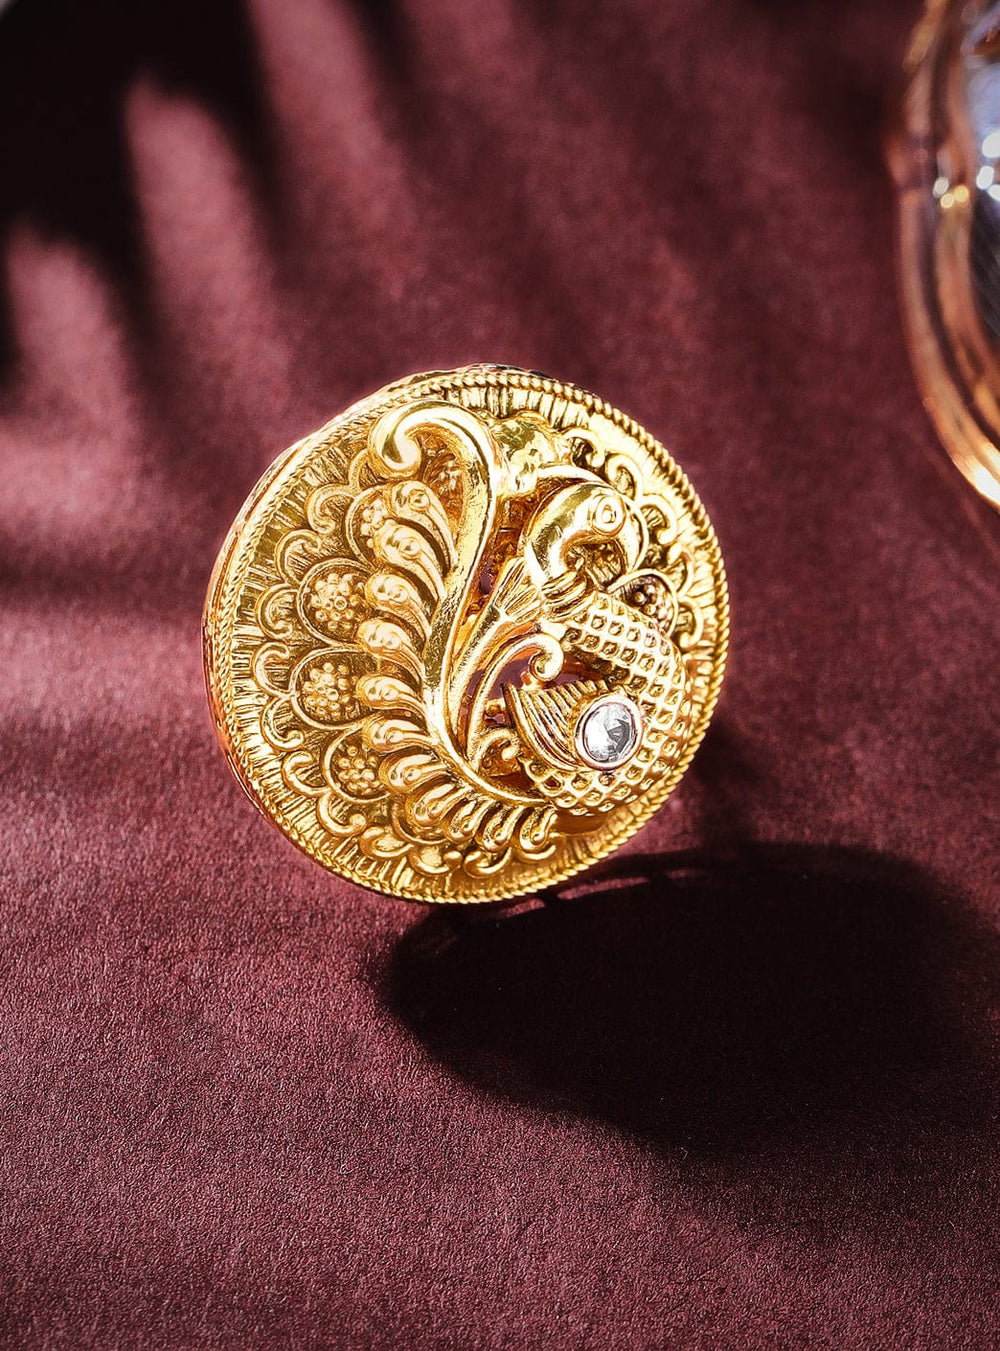 Rubans Luxury 22K Pure Gold Plated Finely Detailed Peacock Statememt Ring. Rings